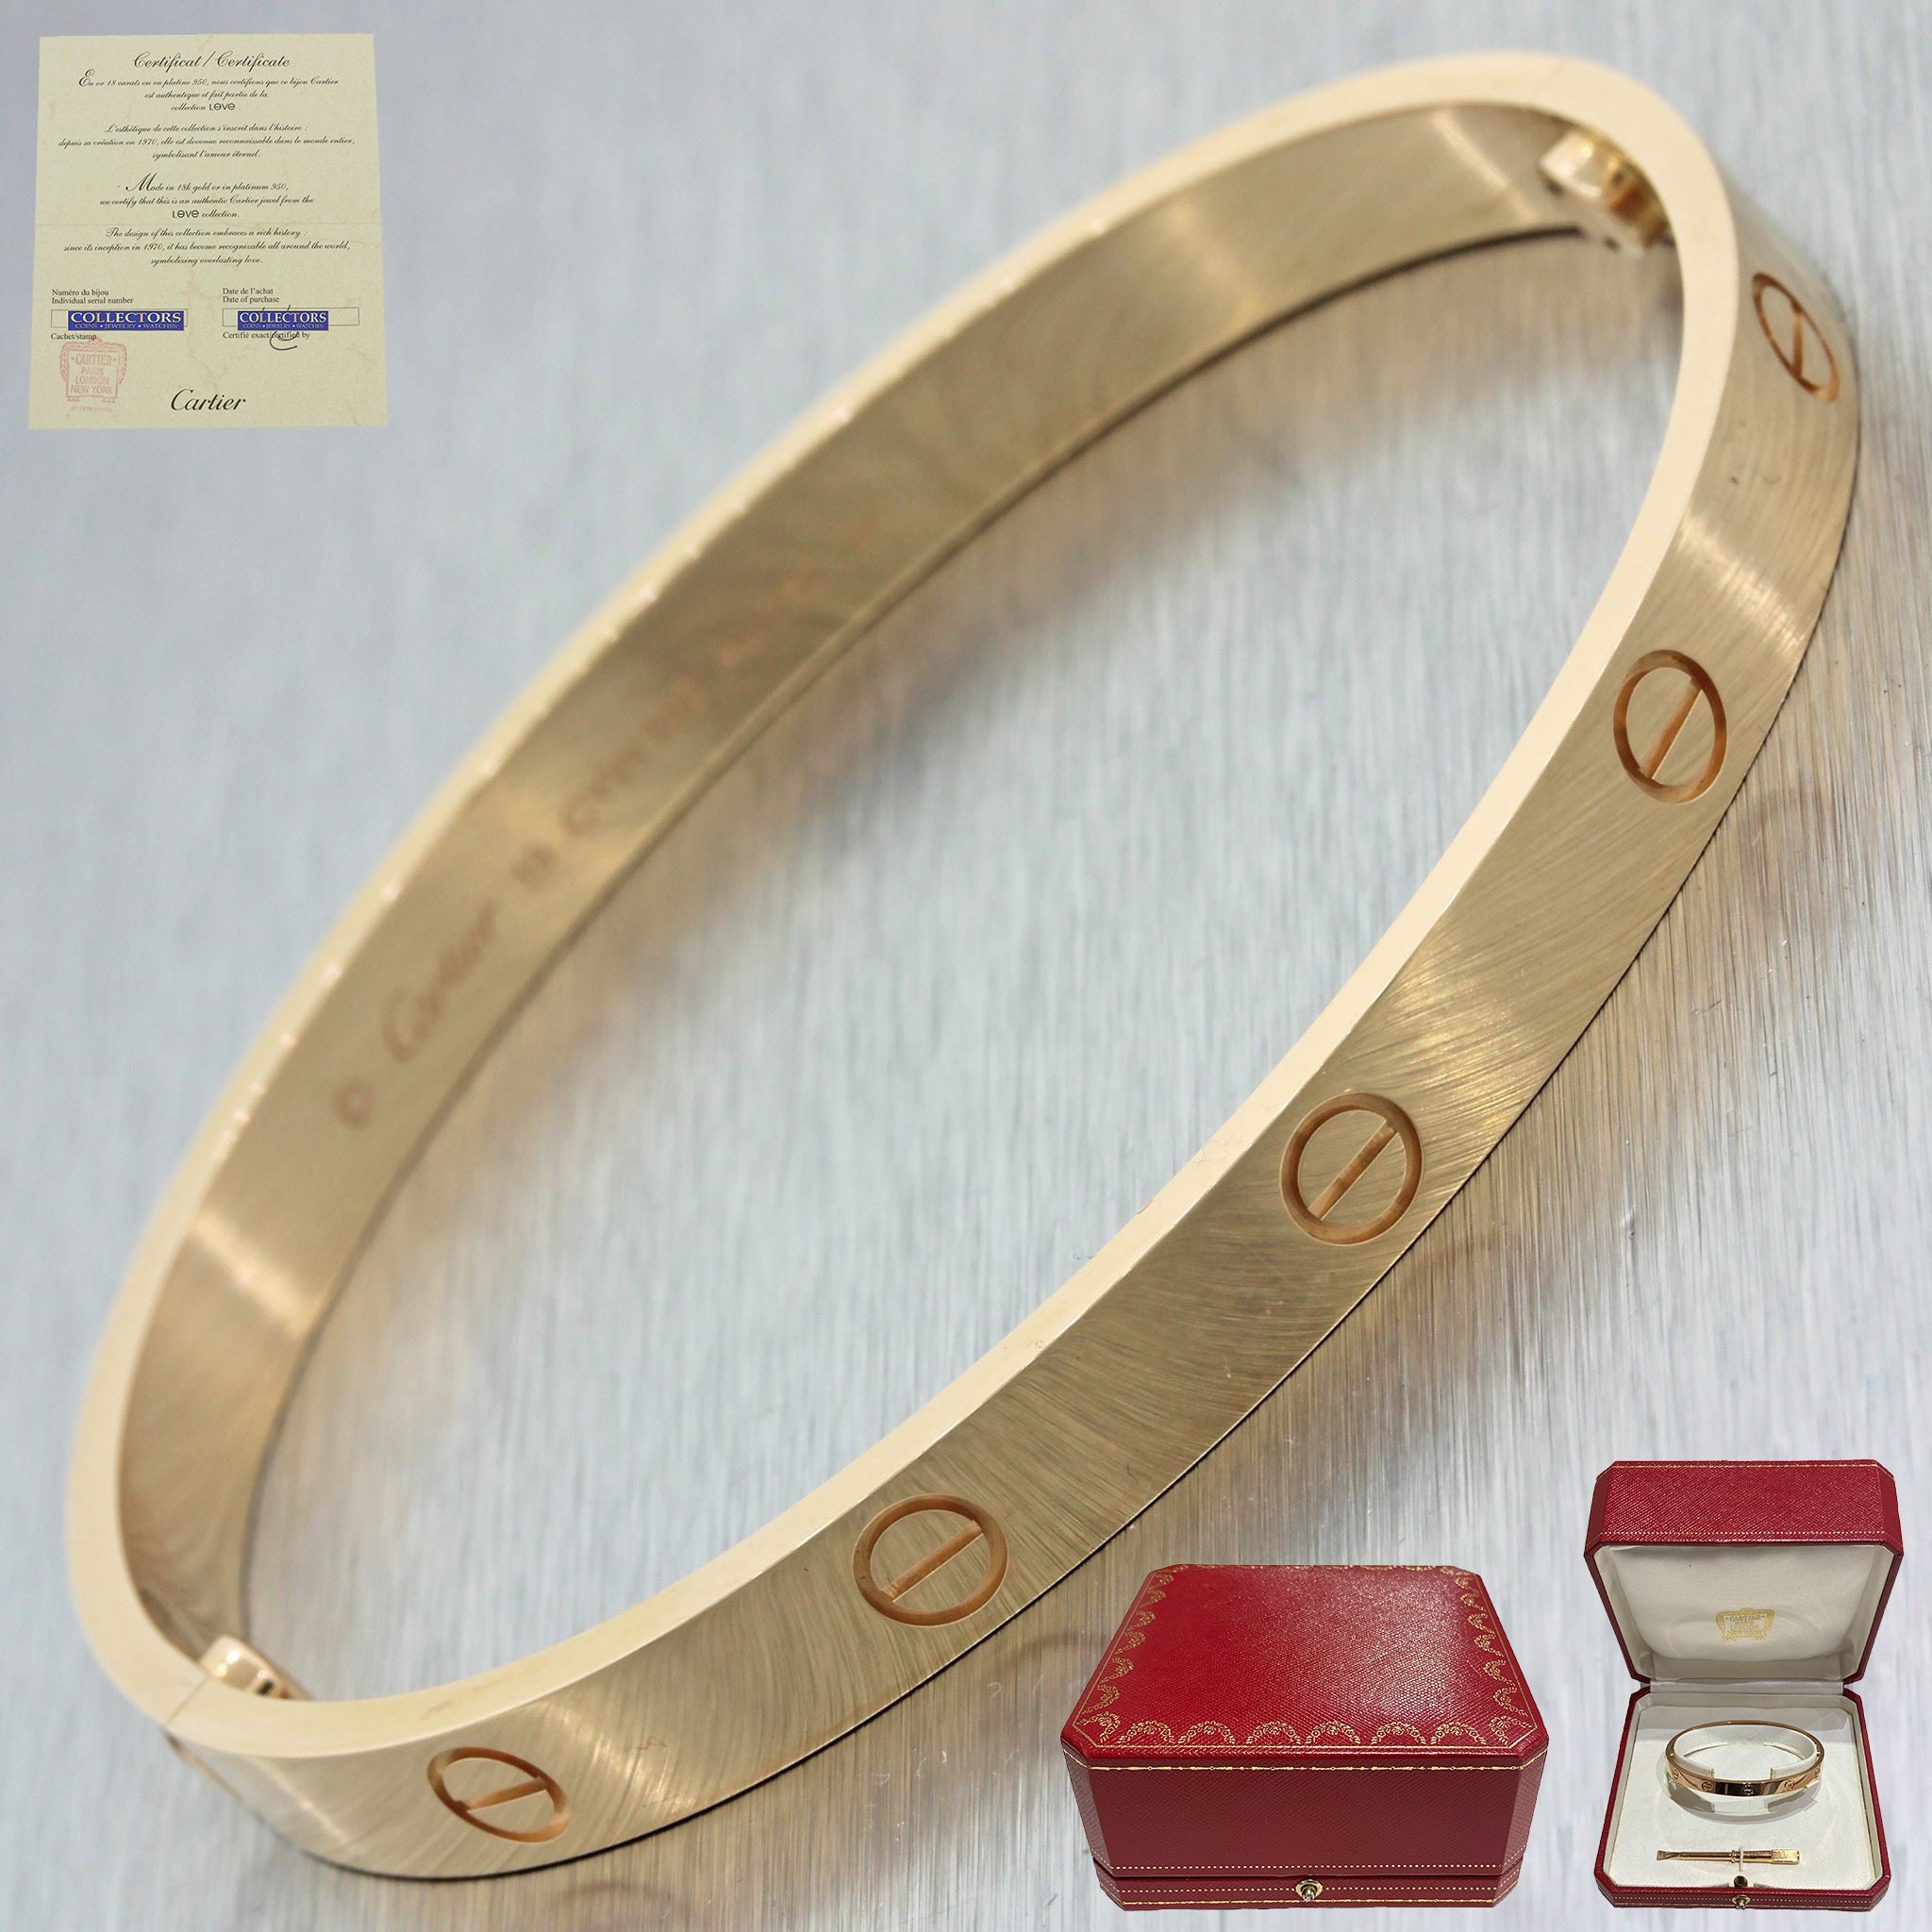 2017 Cartier 18k Rose Gold New Style 